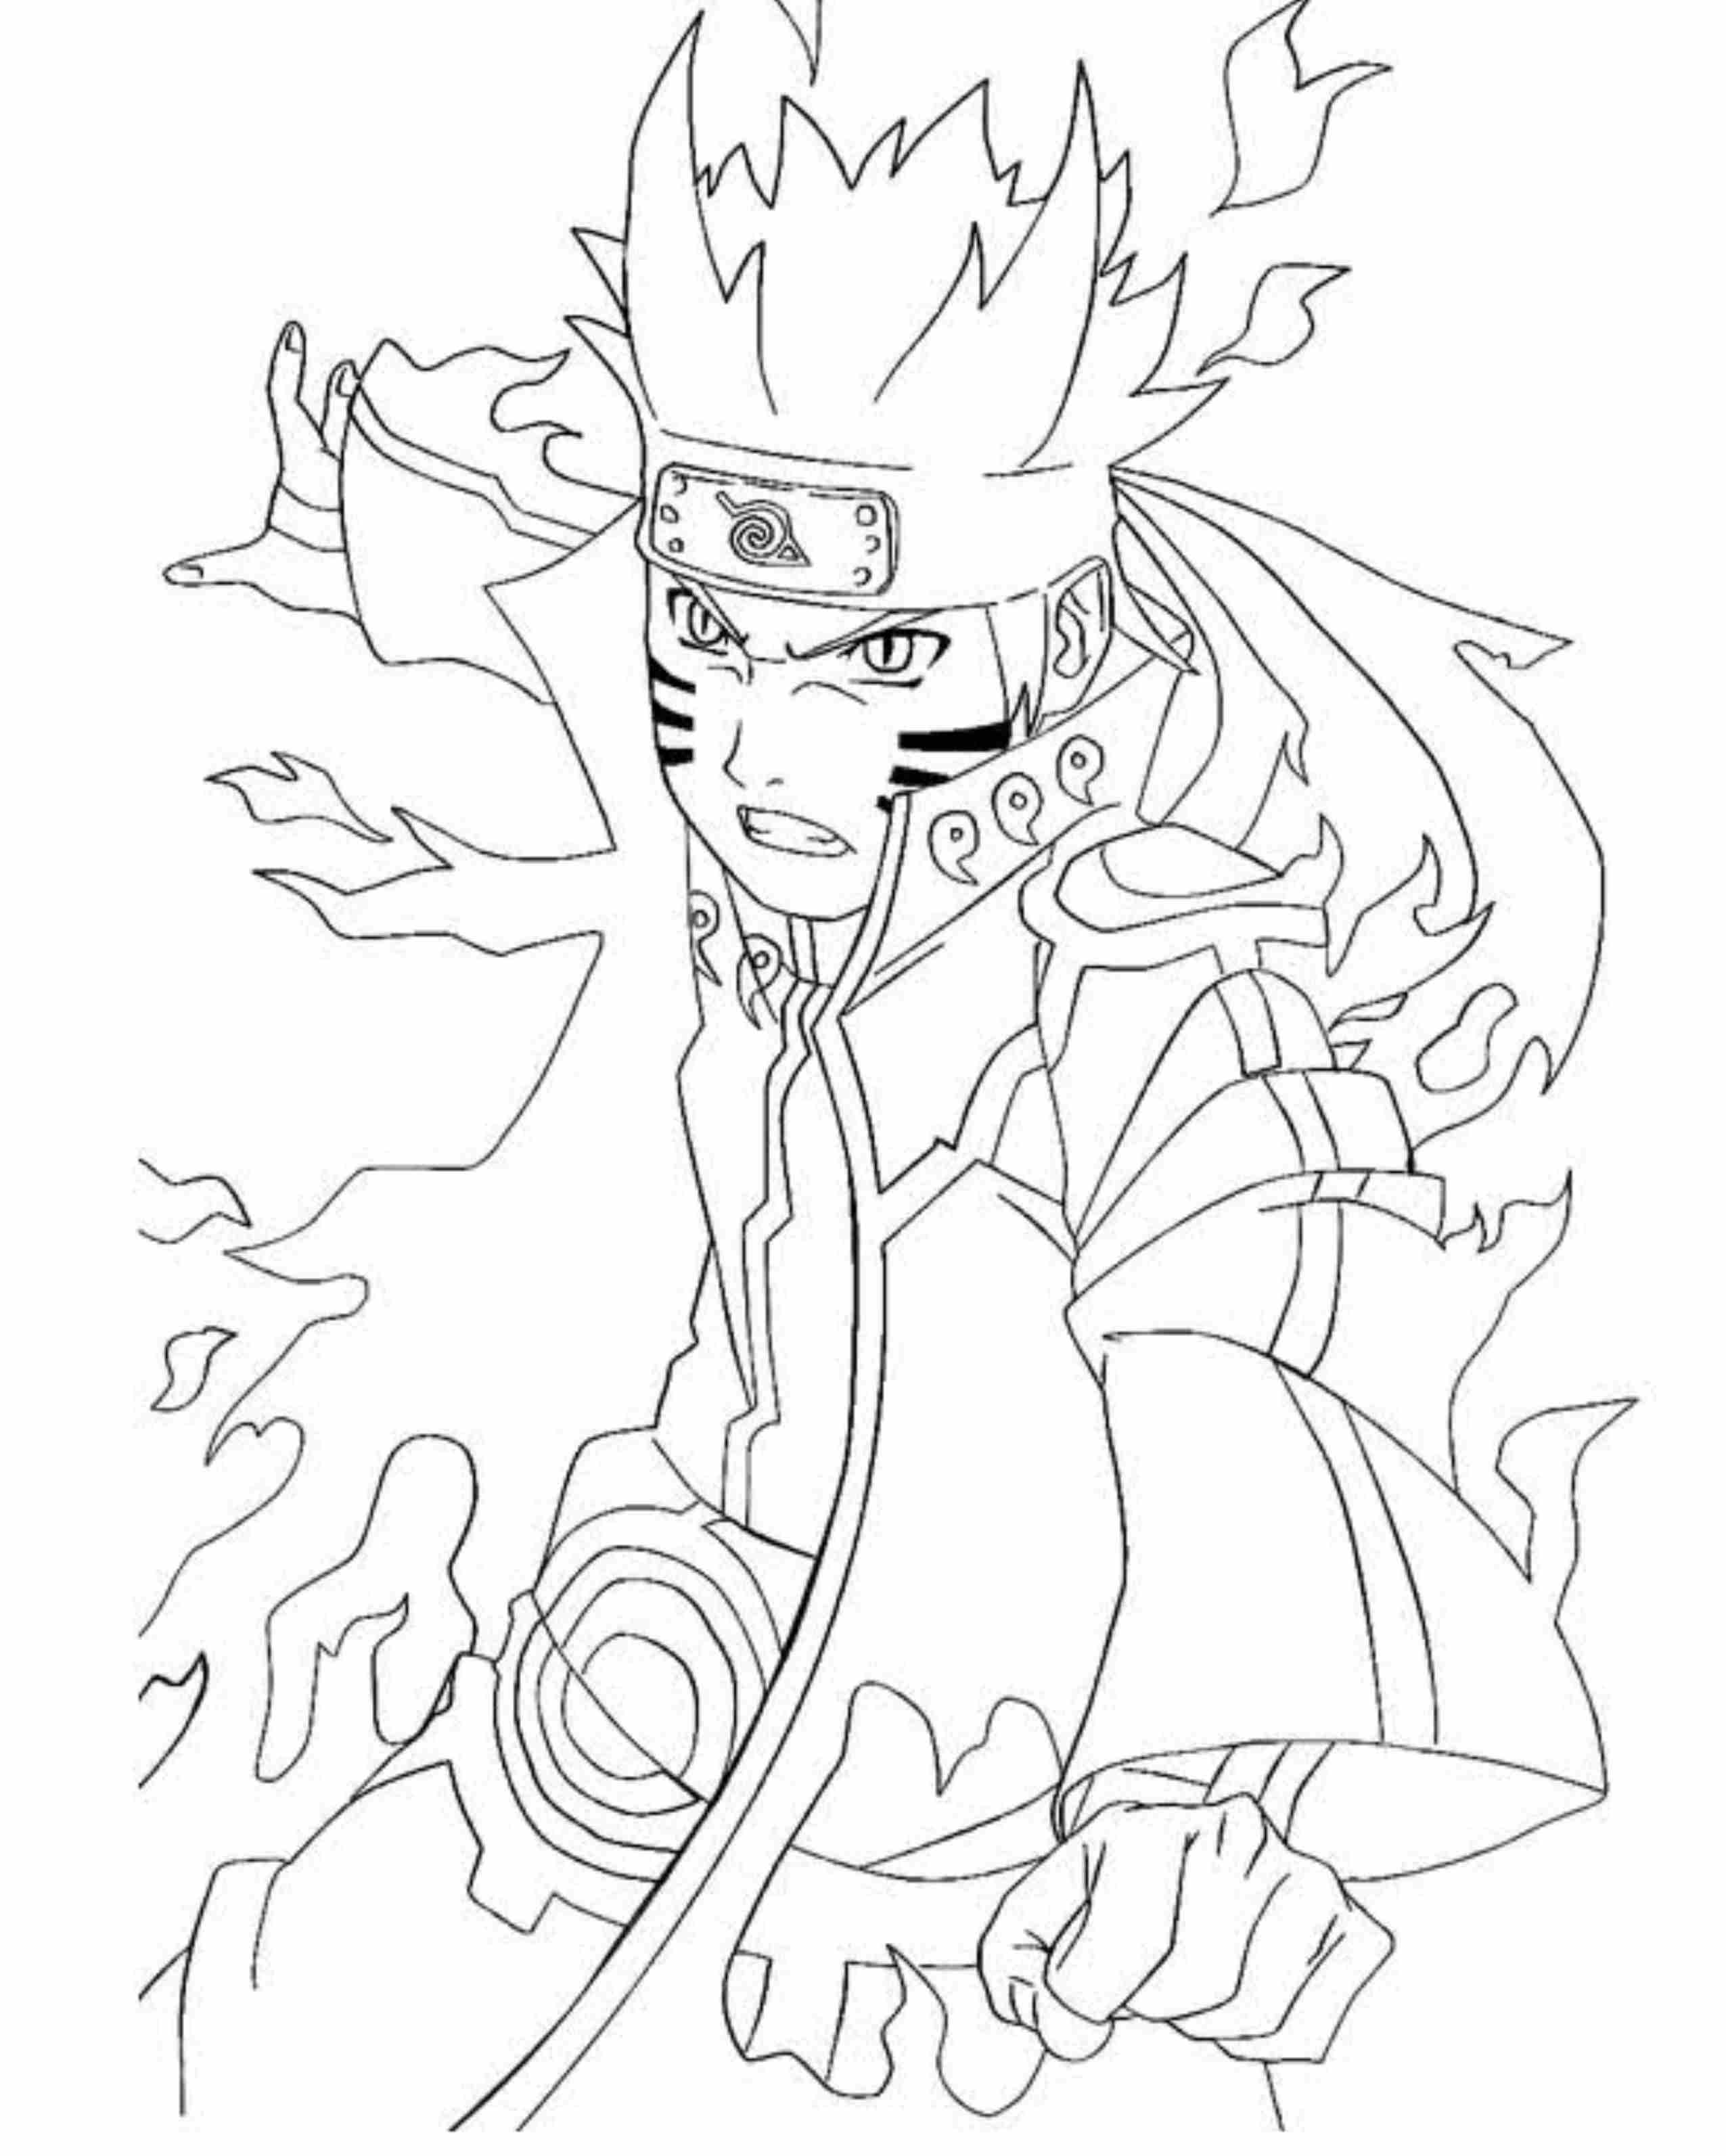 Free Naruto Coloring Pages Download Free Clip Art Free Clip Art On Clipart Library